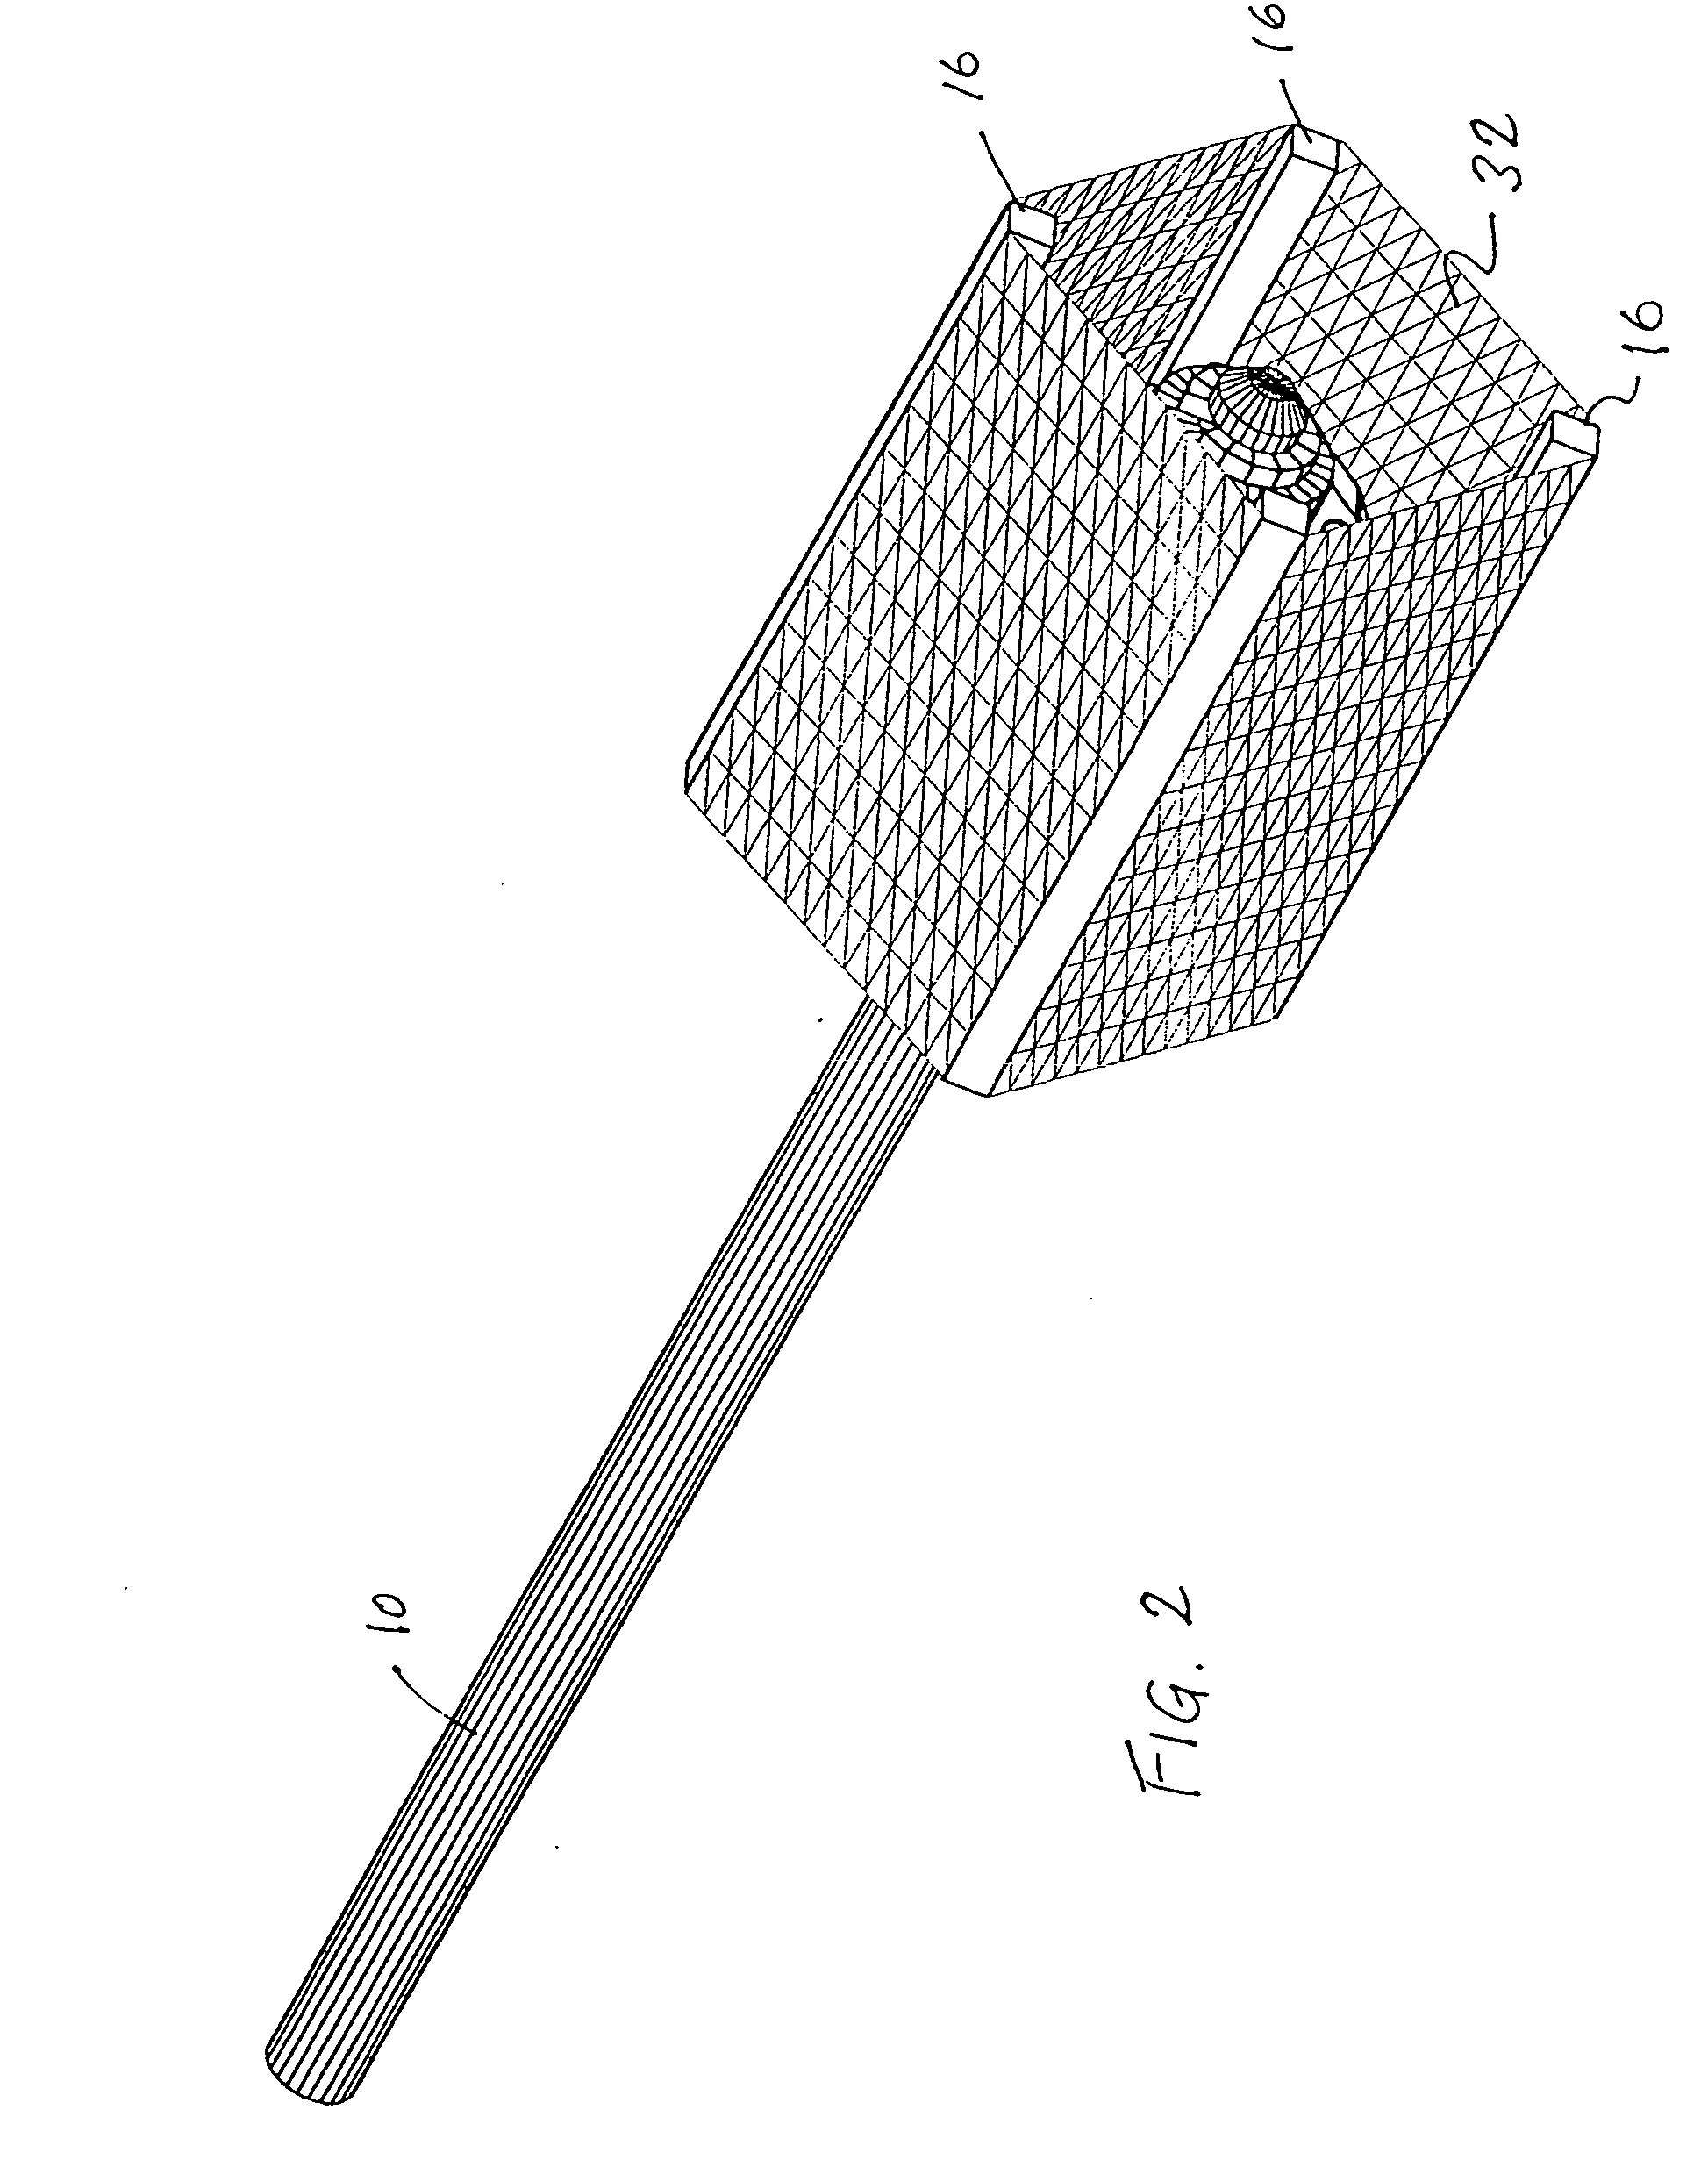 Mechanical bone tamping device for repair of osteoporotic bone fractures